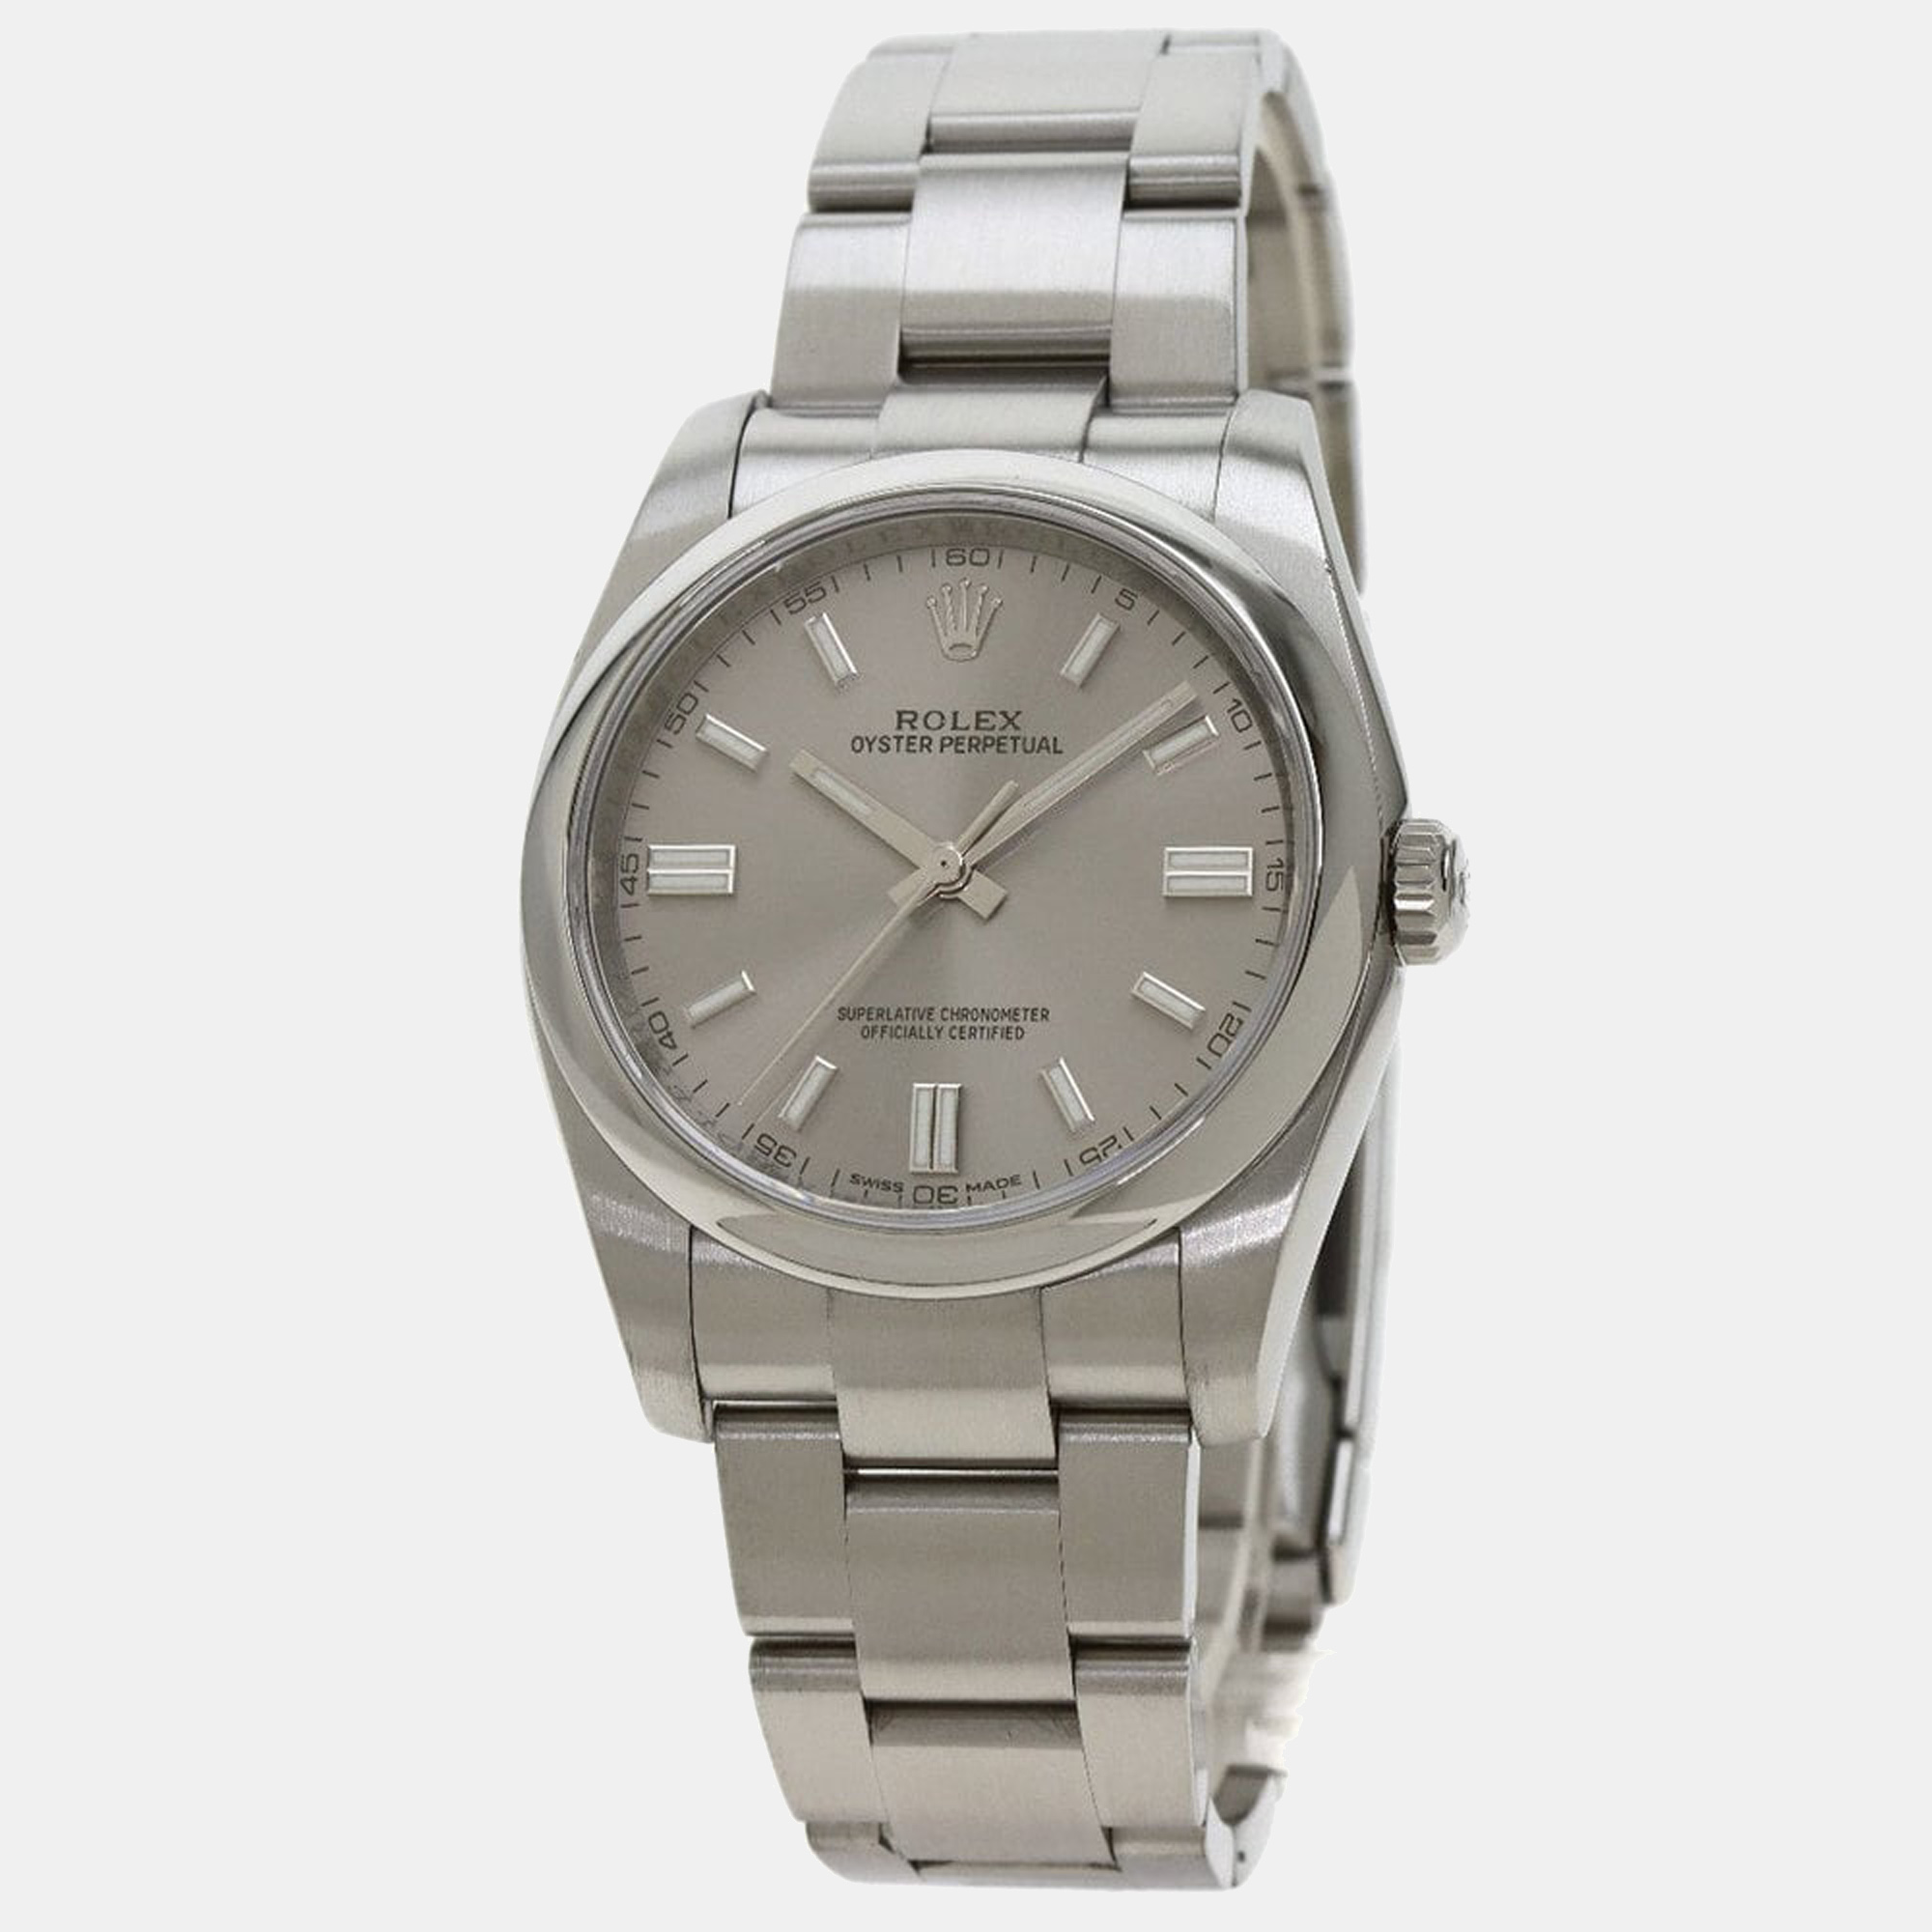 Rolex Grey Stainless Steel Oyster Perpetual 116000 Men's Wristwatch 36 Mm